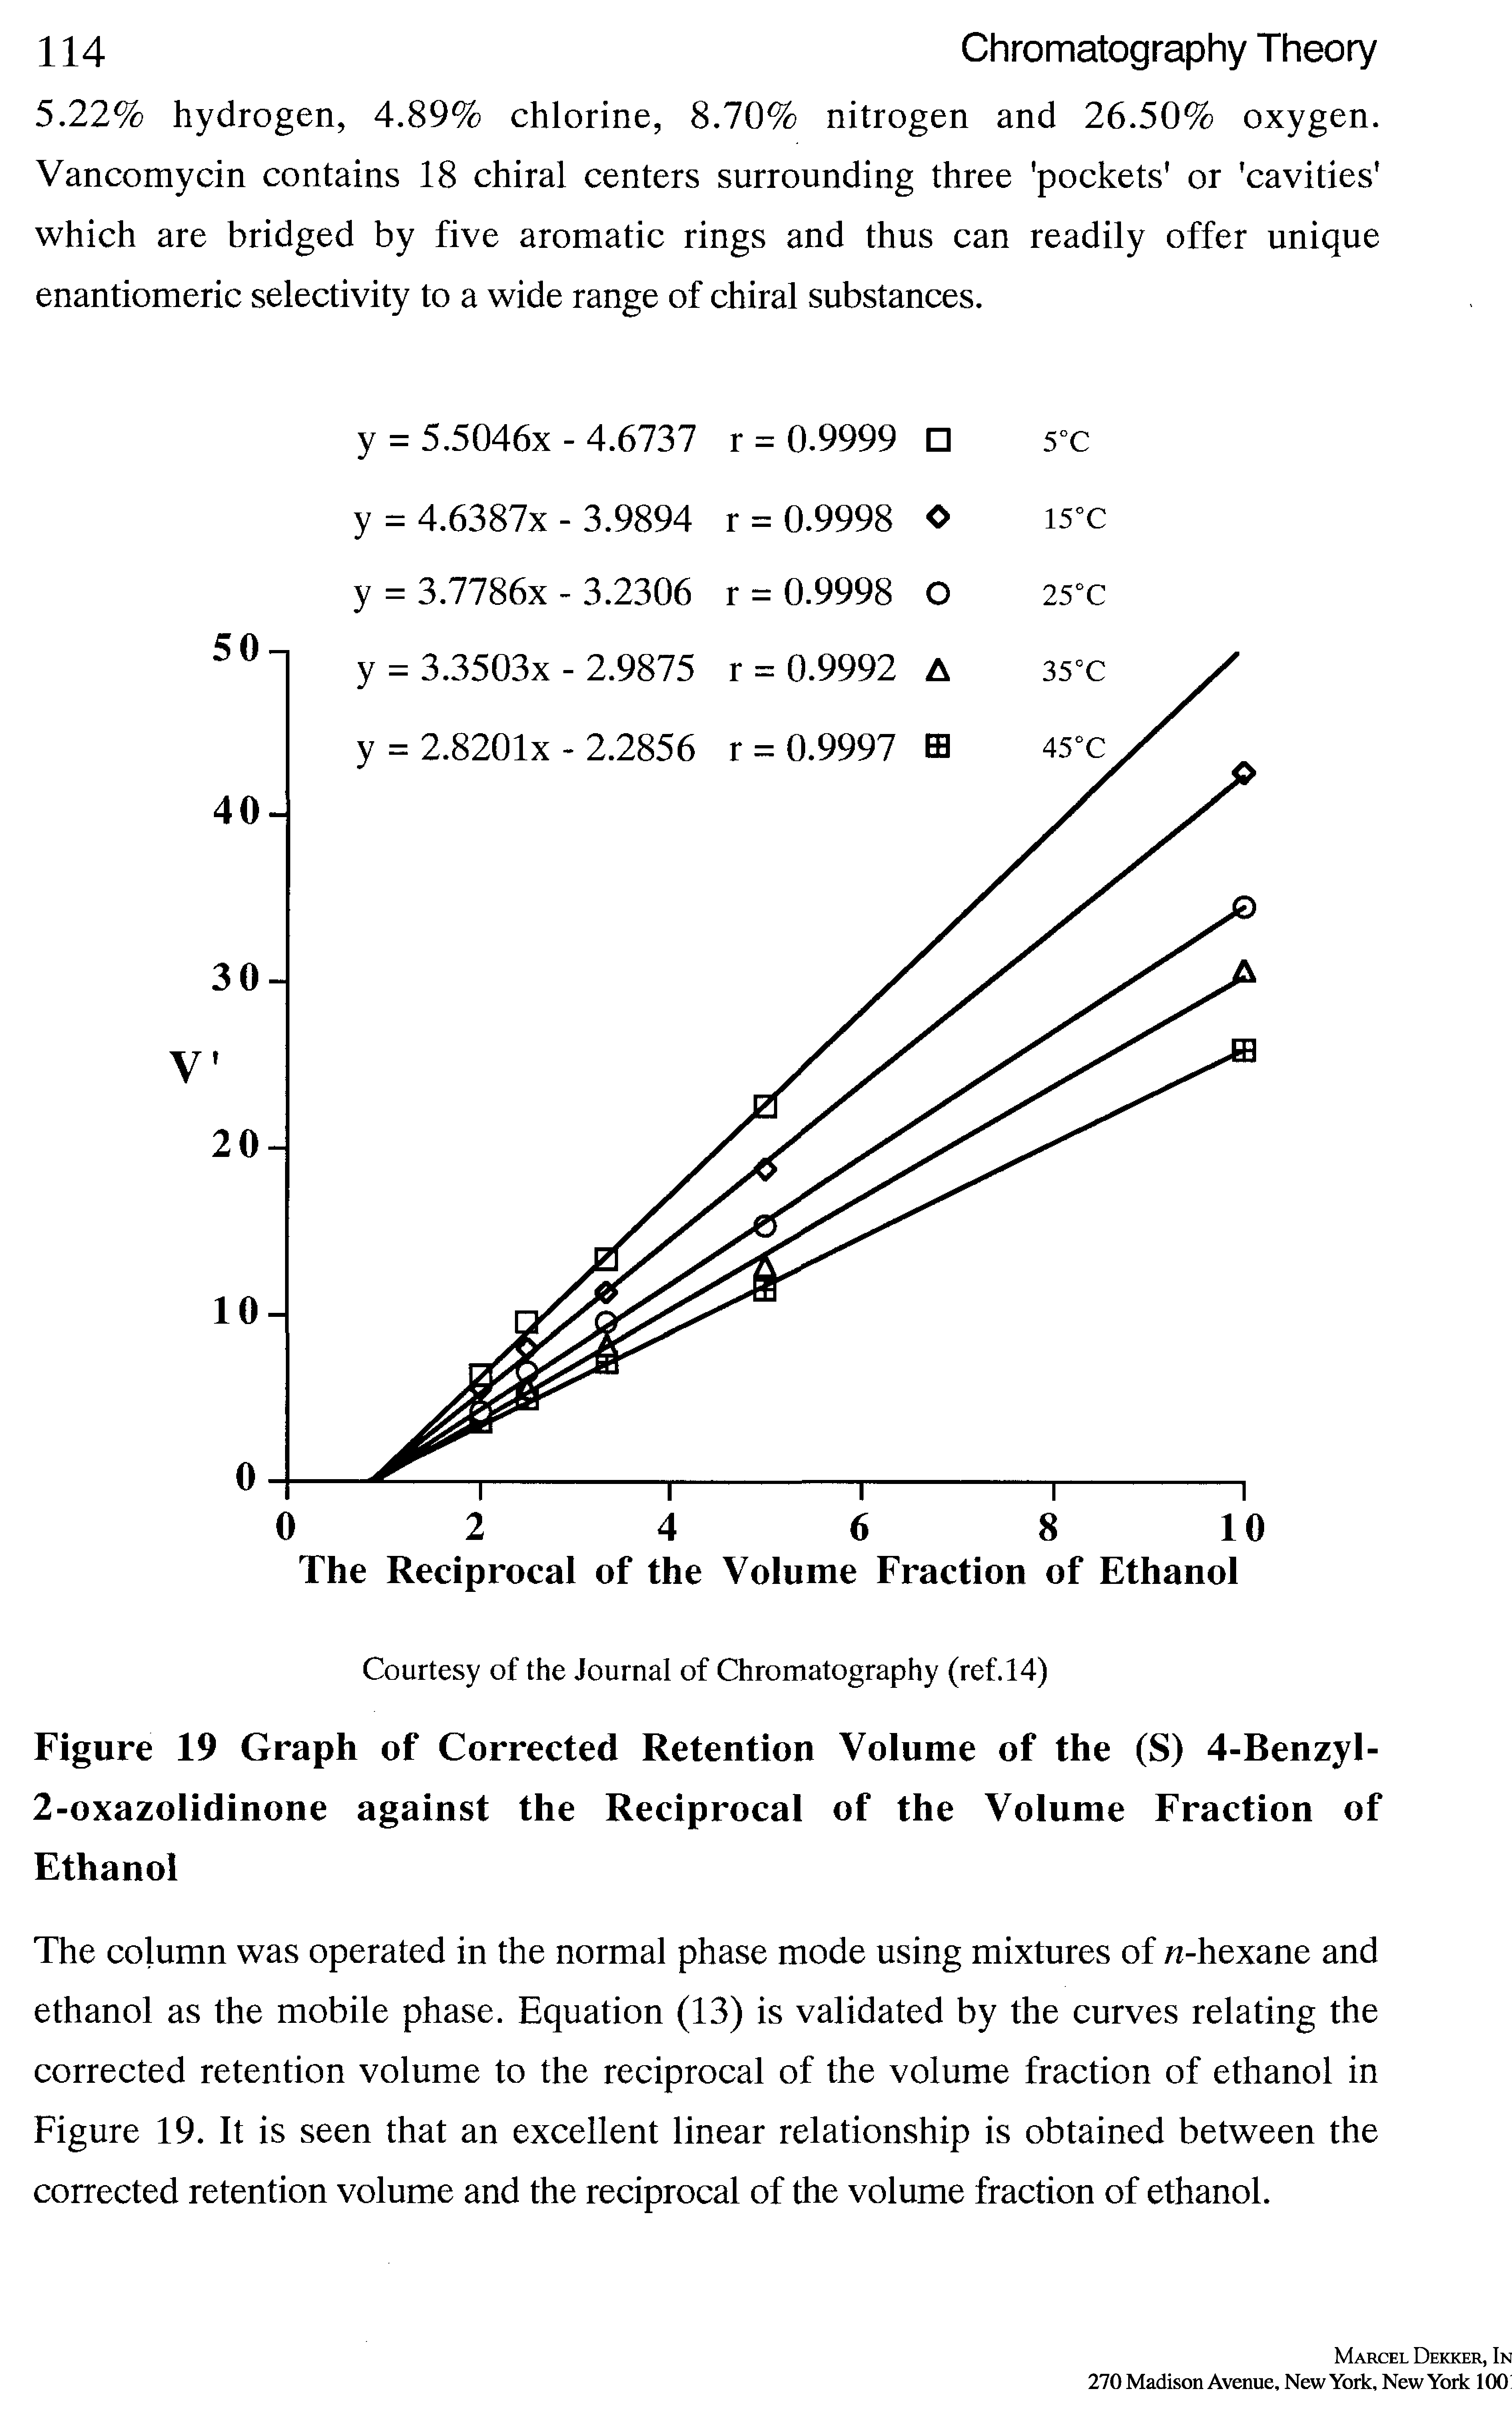 Figure 19 Graph of Corrected Retention Volume of the (S) 4-Benzyl-2-oxazolidinone against the Reciprocal of the Volume Fraction of Ethanol...